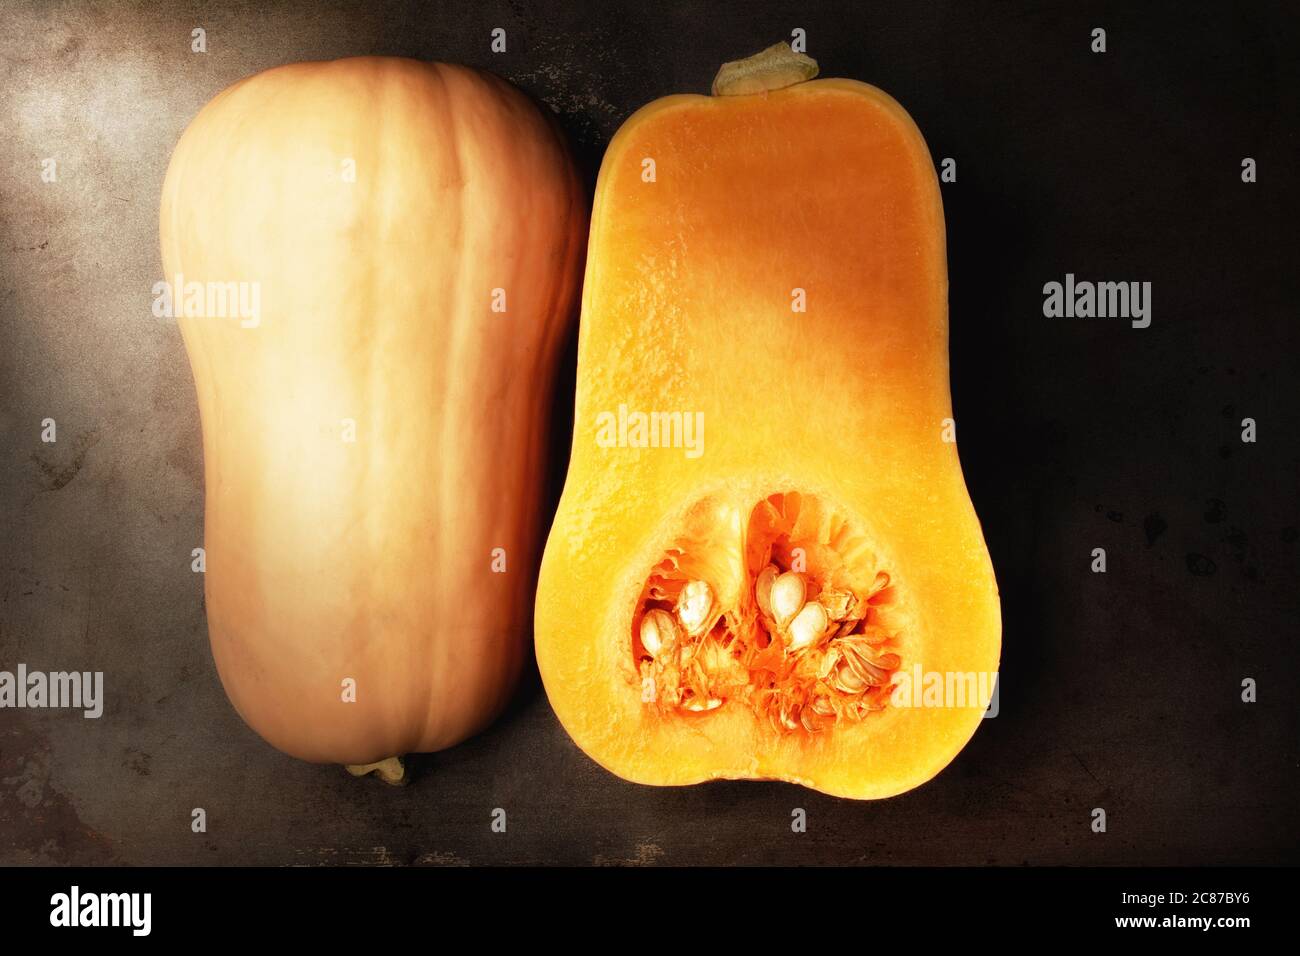 Butternut Squash cut in half showing both the inside and outside. Flat lay horizontal format with warm side light.. Stock Photo